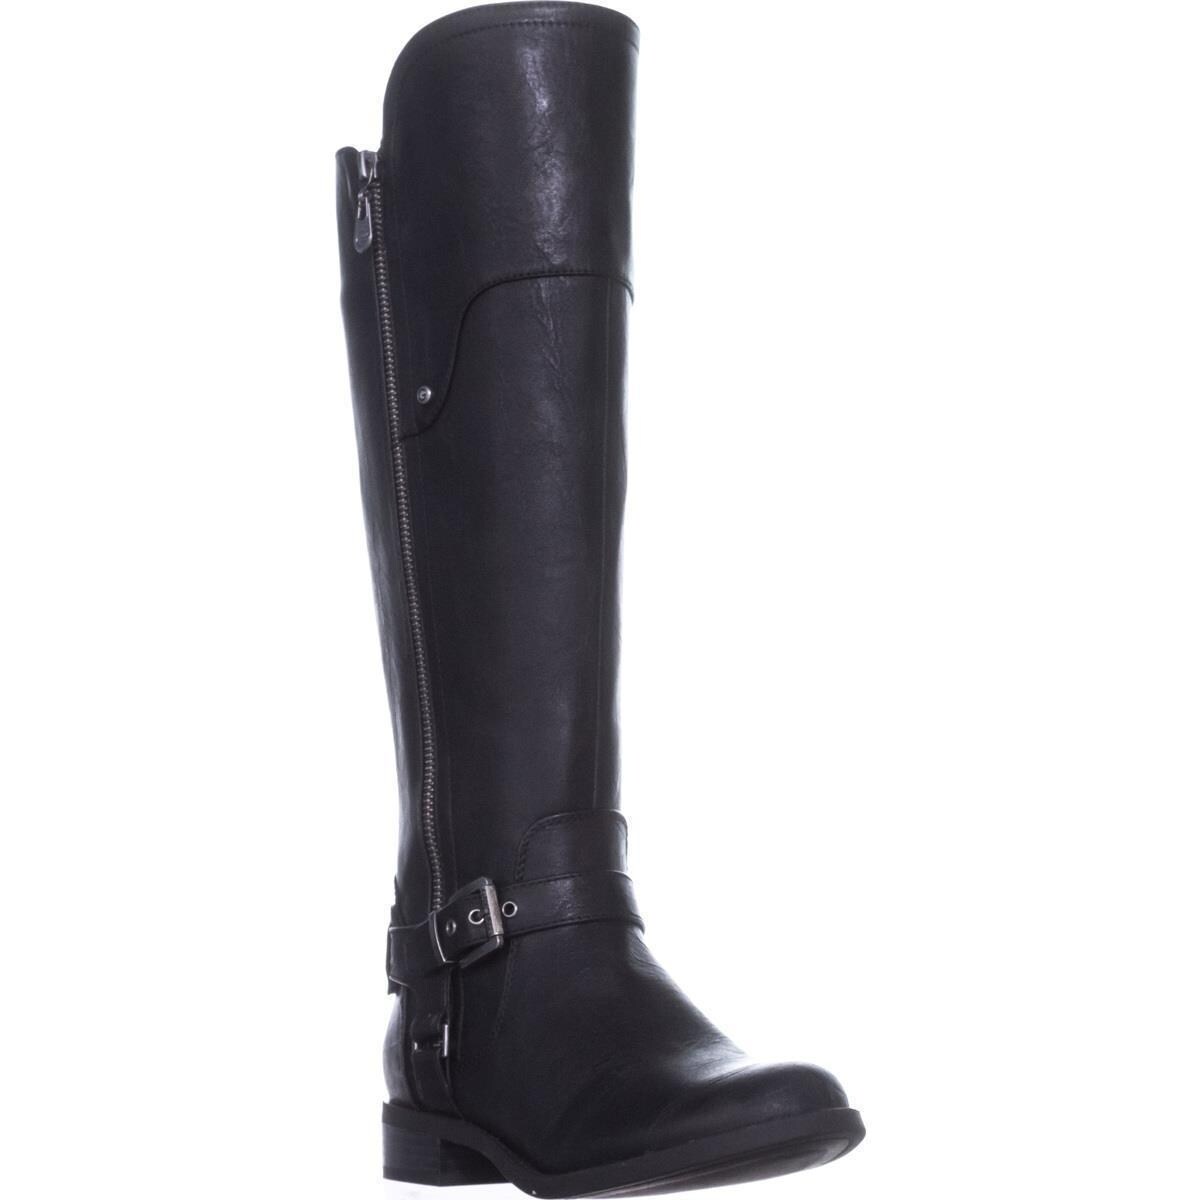 harson tall riding boots